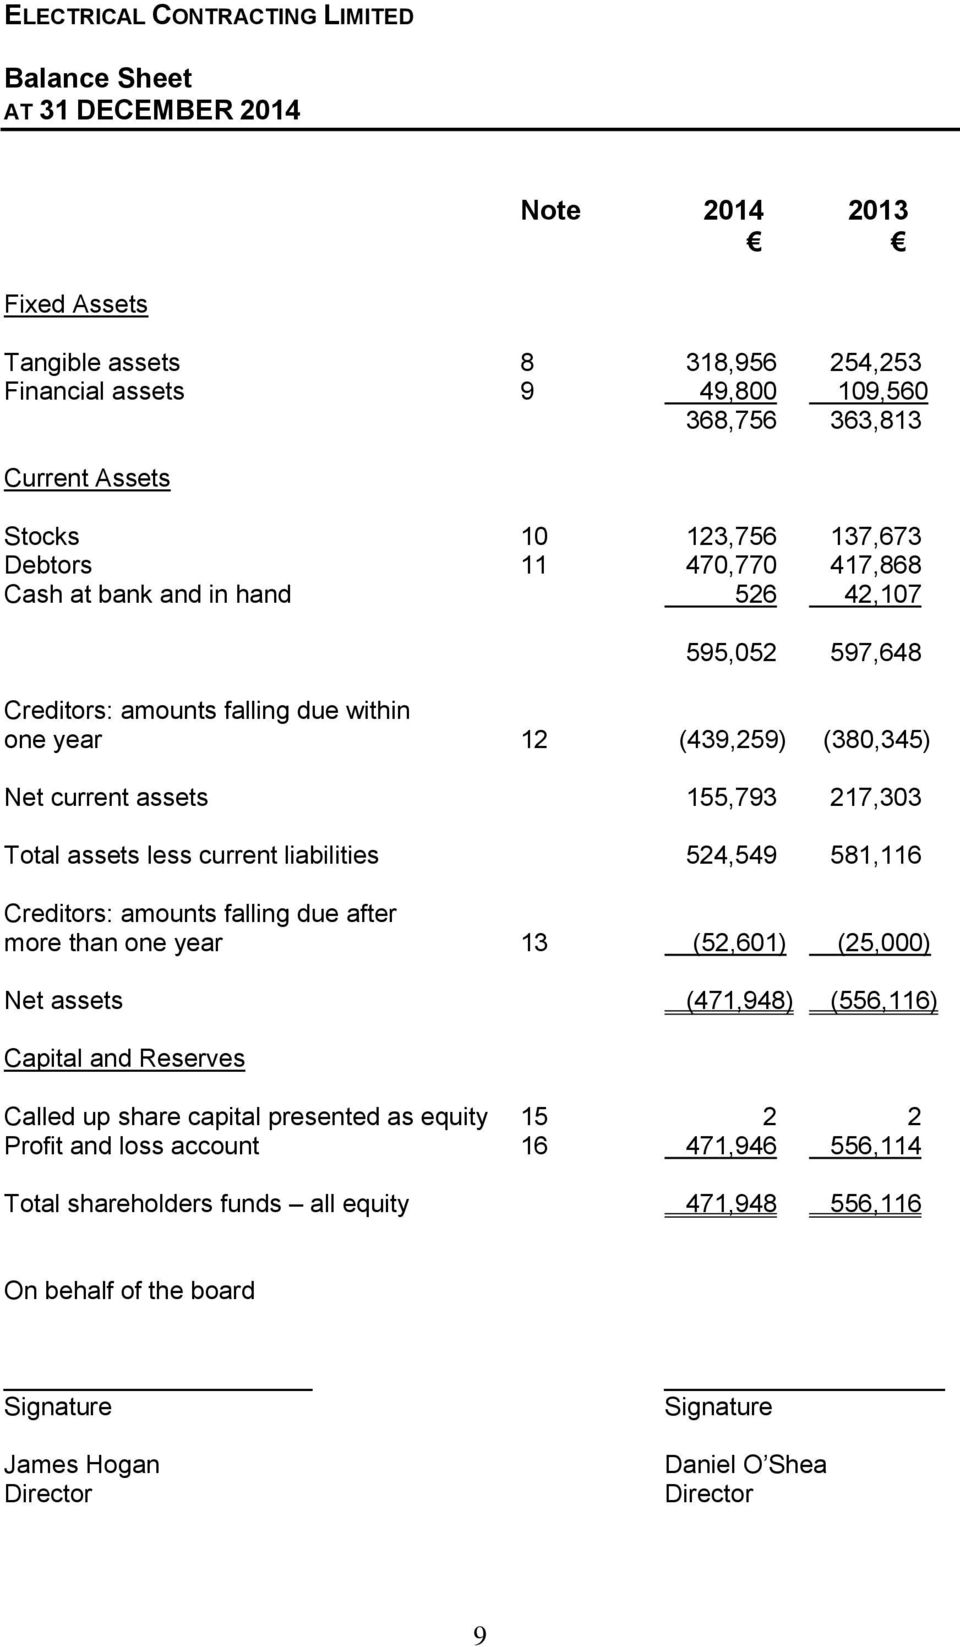 current liabilities 524,549 581,116 Creditors: amounts falling due after more than one year 13 (52,601) (25,000) Net assets (471,948) (556,116) Capital and Reserves Called up share capital